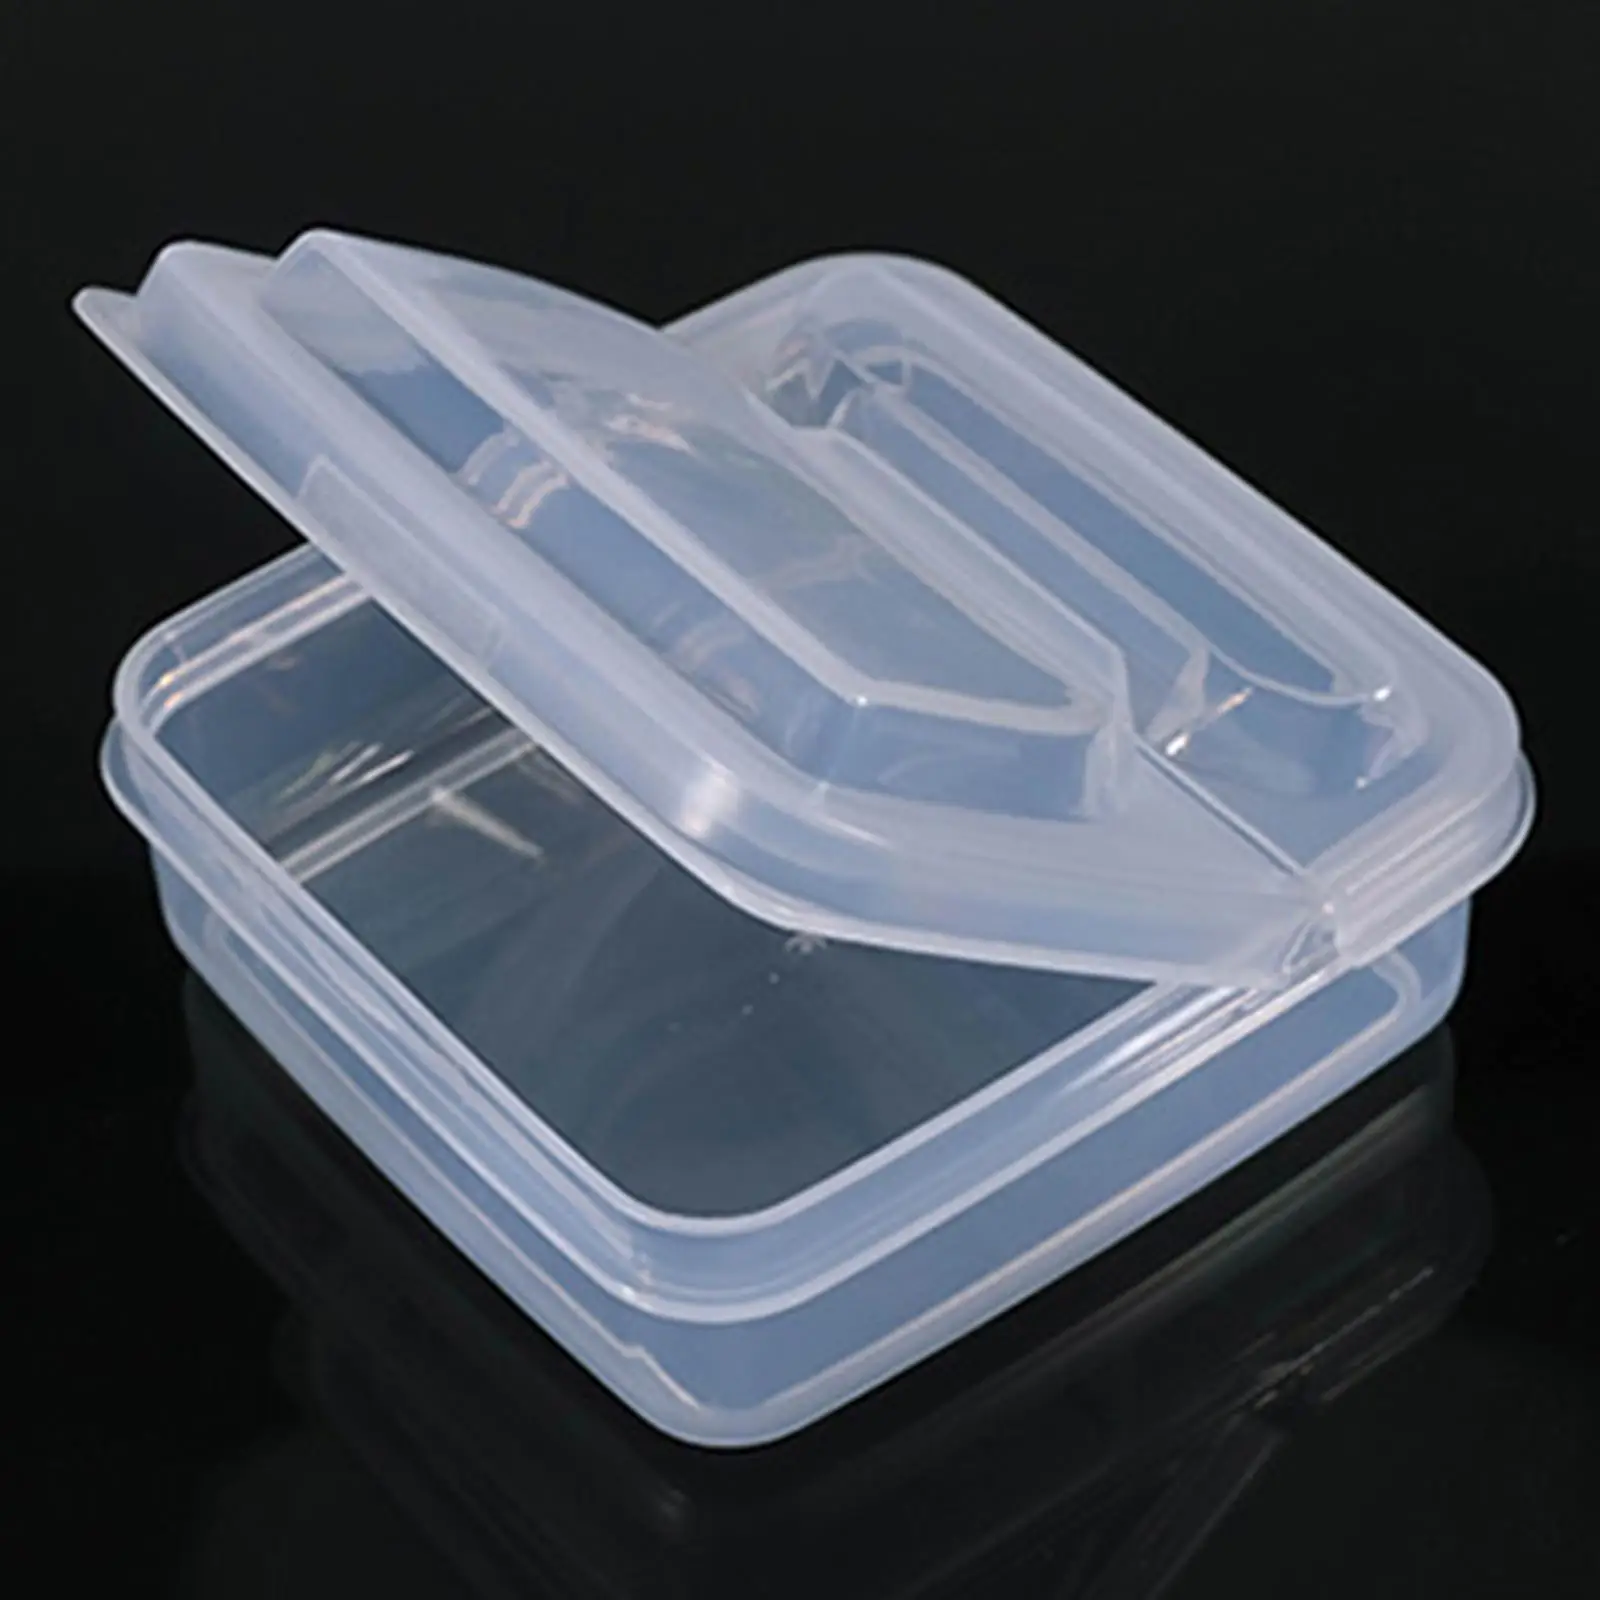 5x Sliced Cheese Container Compact Cookie Holder with Flip Lid Freezer Drawers Bins Transparent Cheese Sliced Storage Box